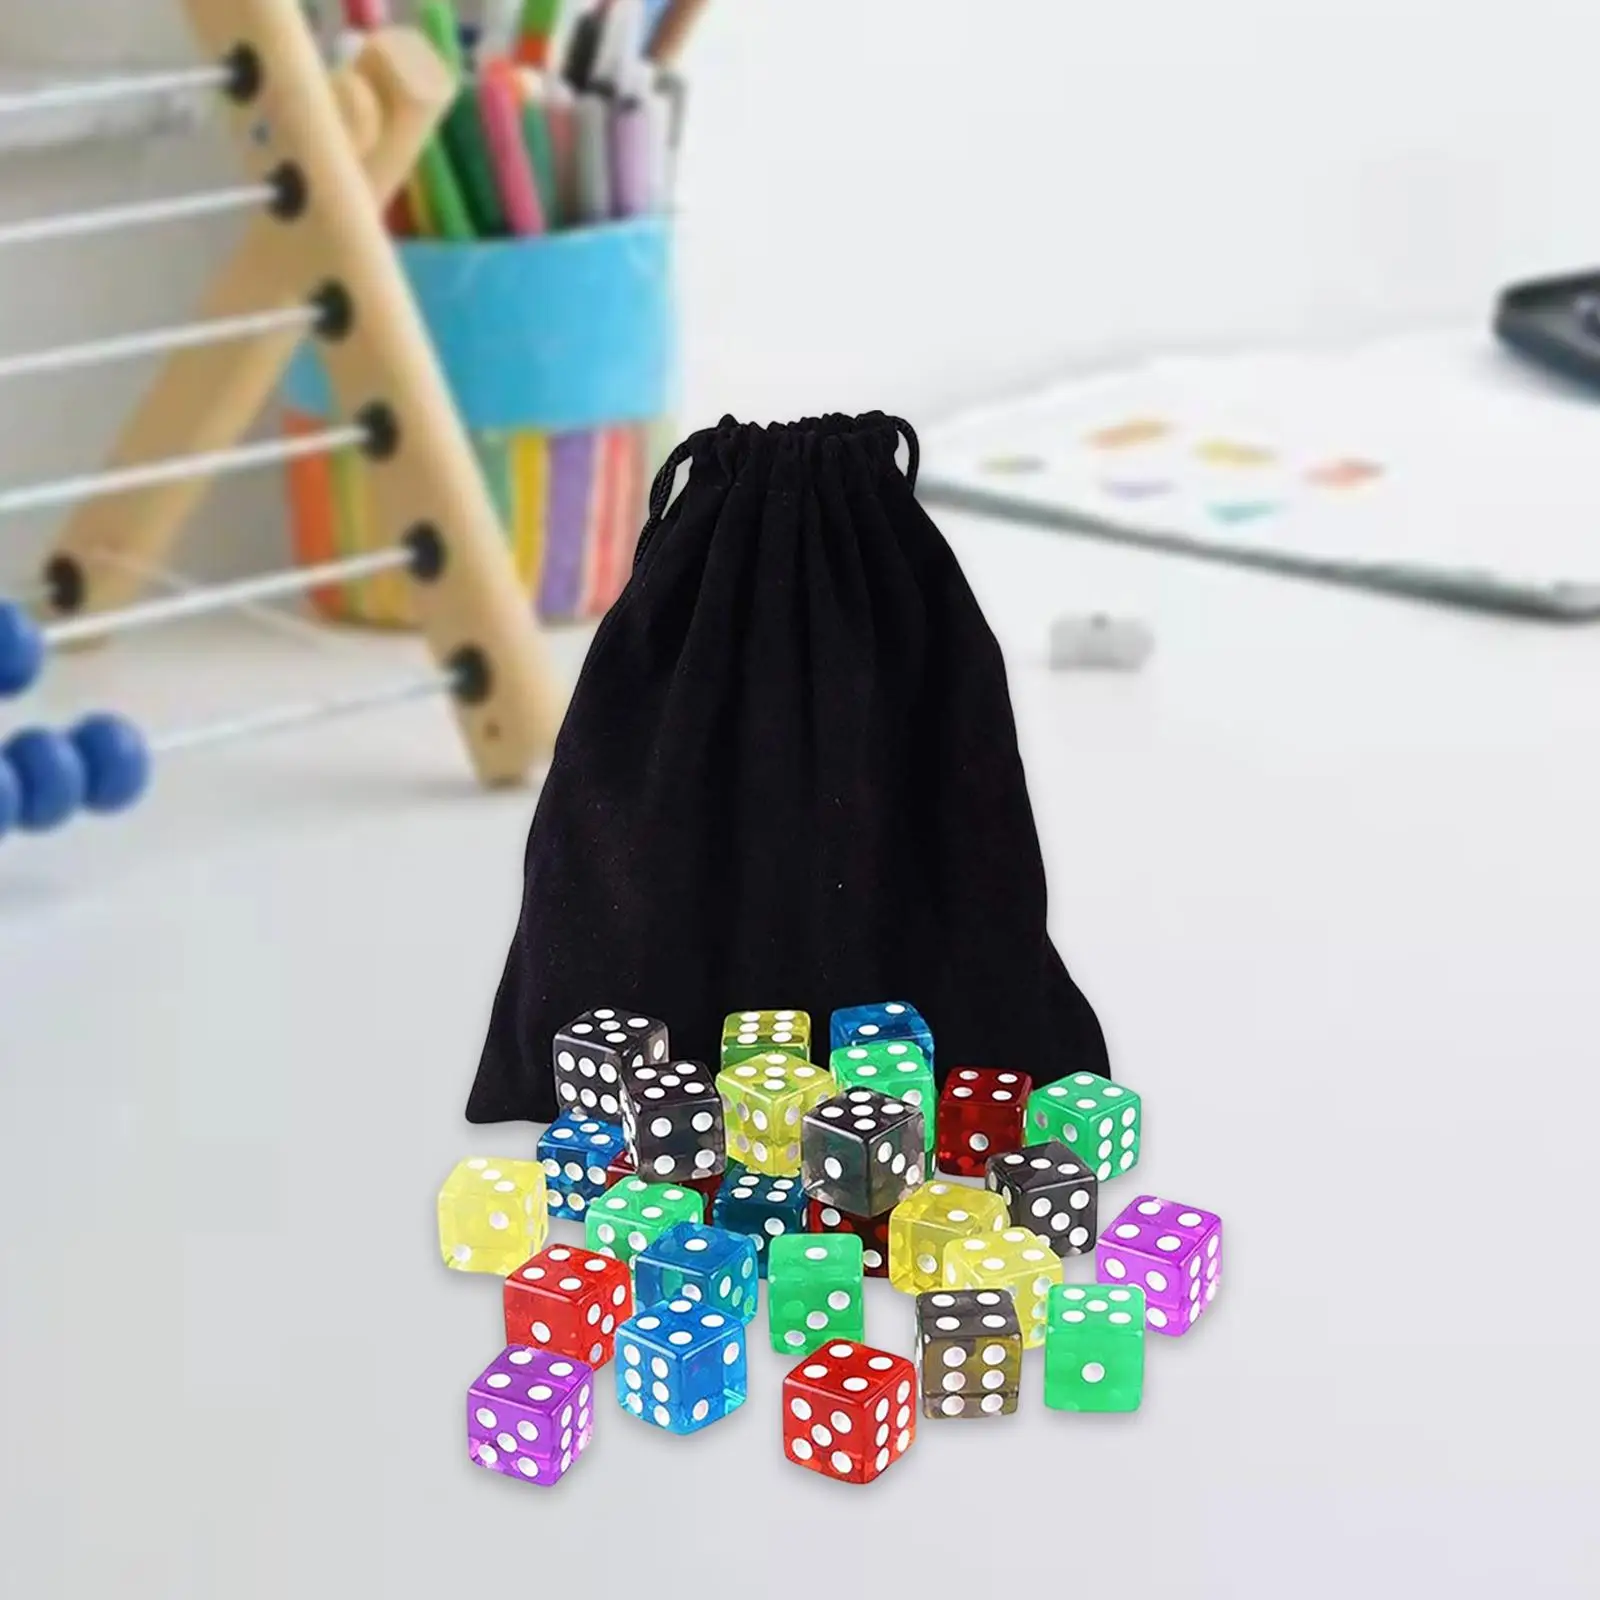 60Pcs 6 Sided Dice Set with Velvet Pouch for MTG Table Games 16mm Transparent Acrylic Dice